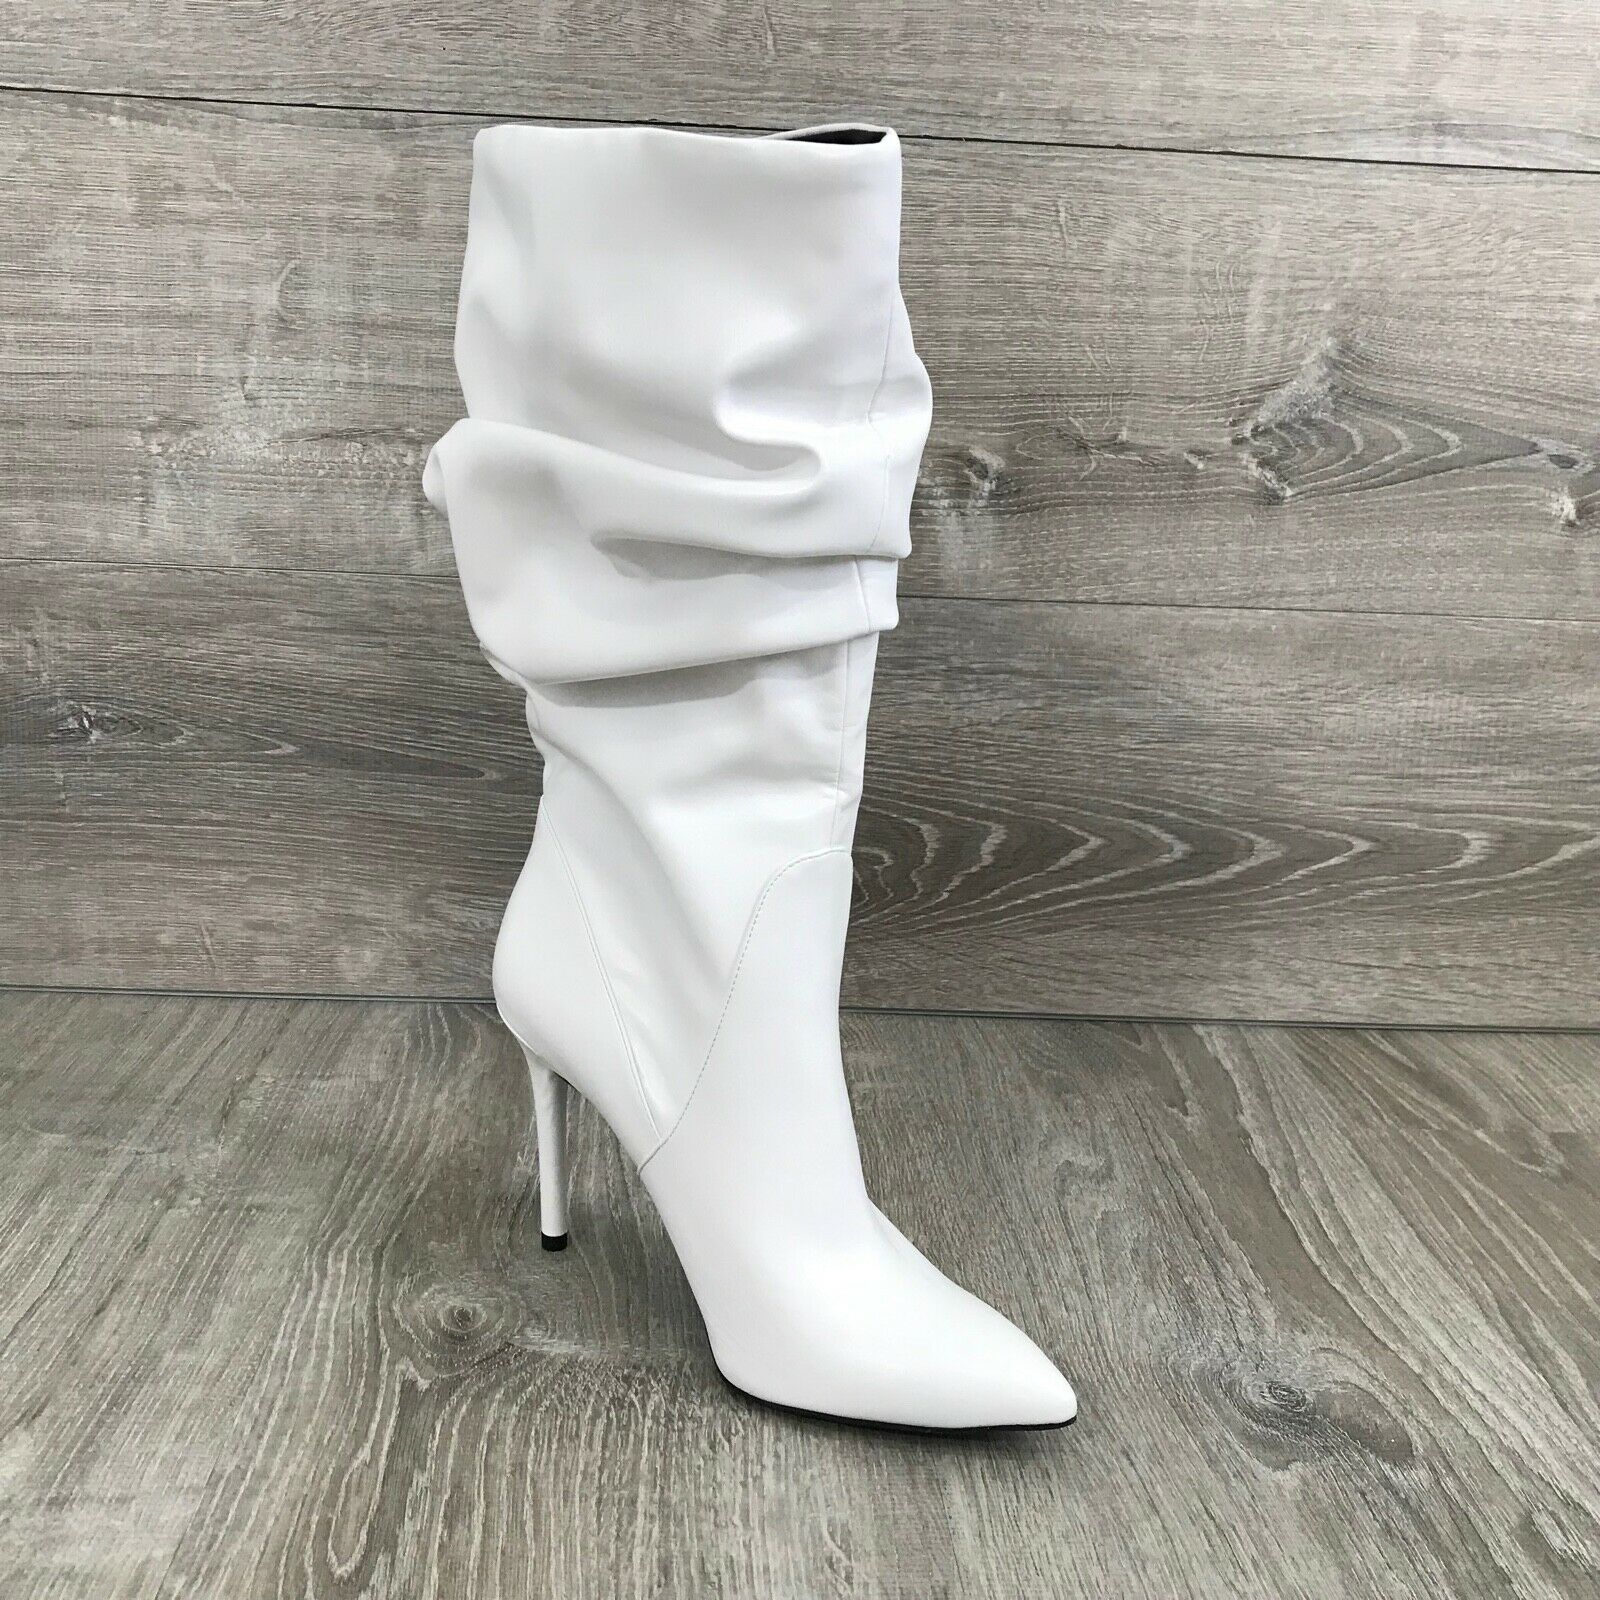 lyndy slouch boot jessica simpson